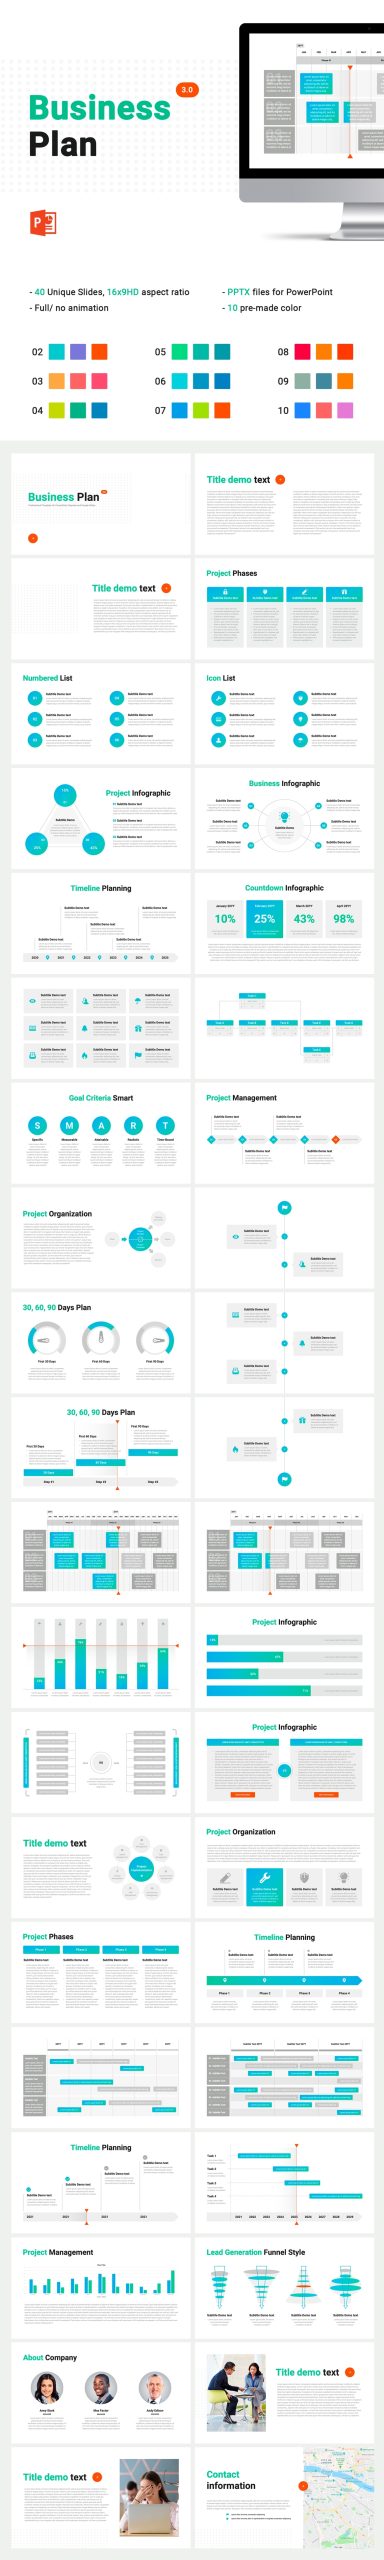 Business Plan Powerpoint Template – Download Now! With Regard To Business Plan Powerpoint Template Free Download